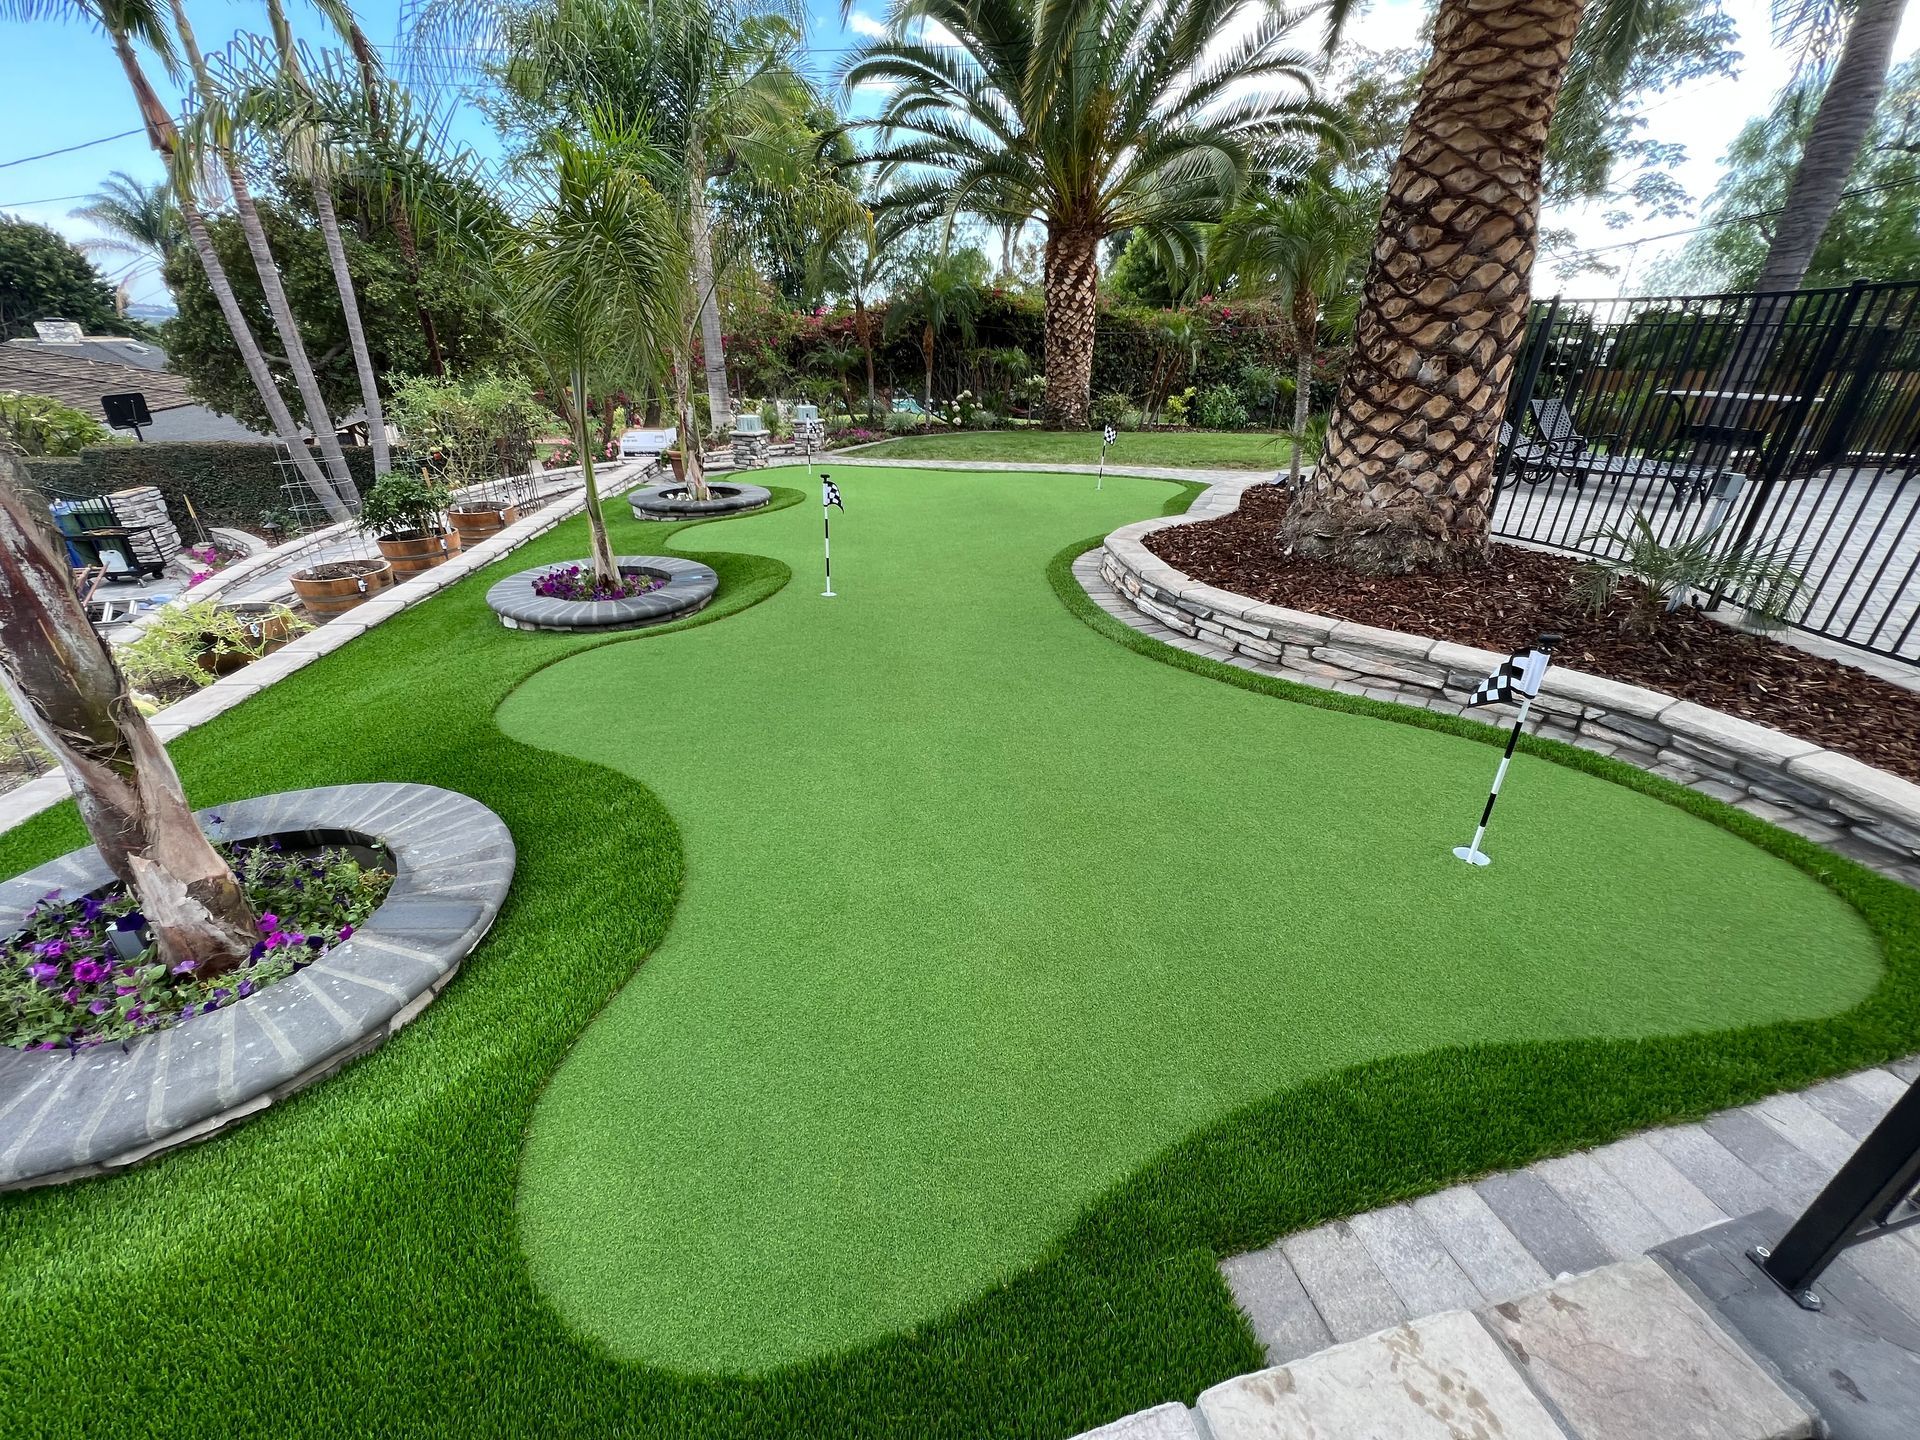 putting green and planters in Whittier